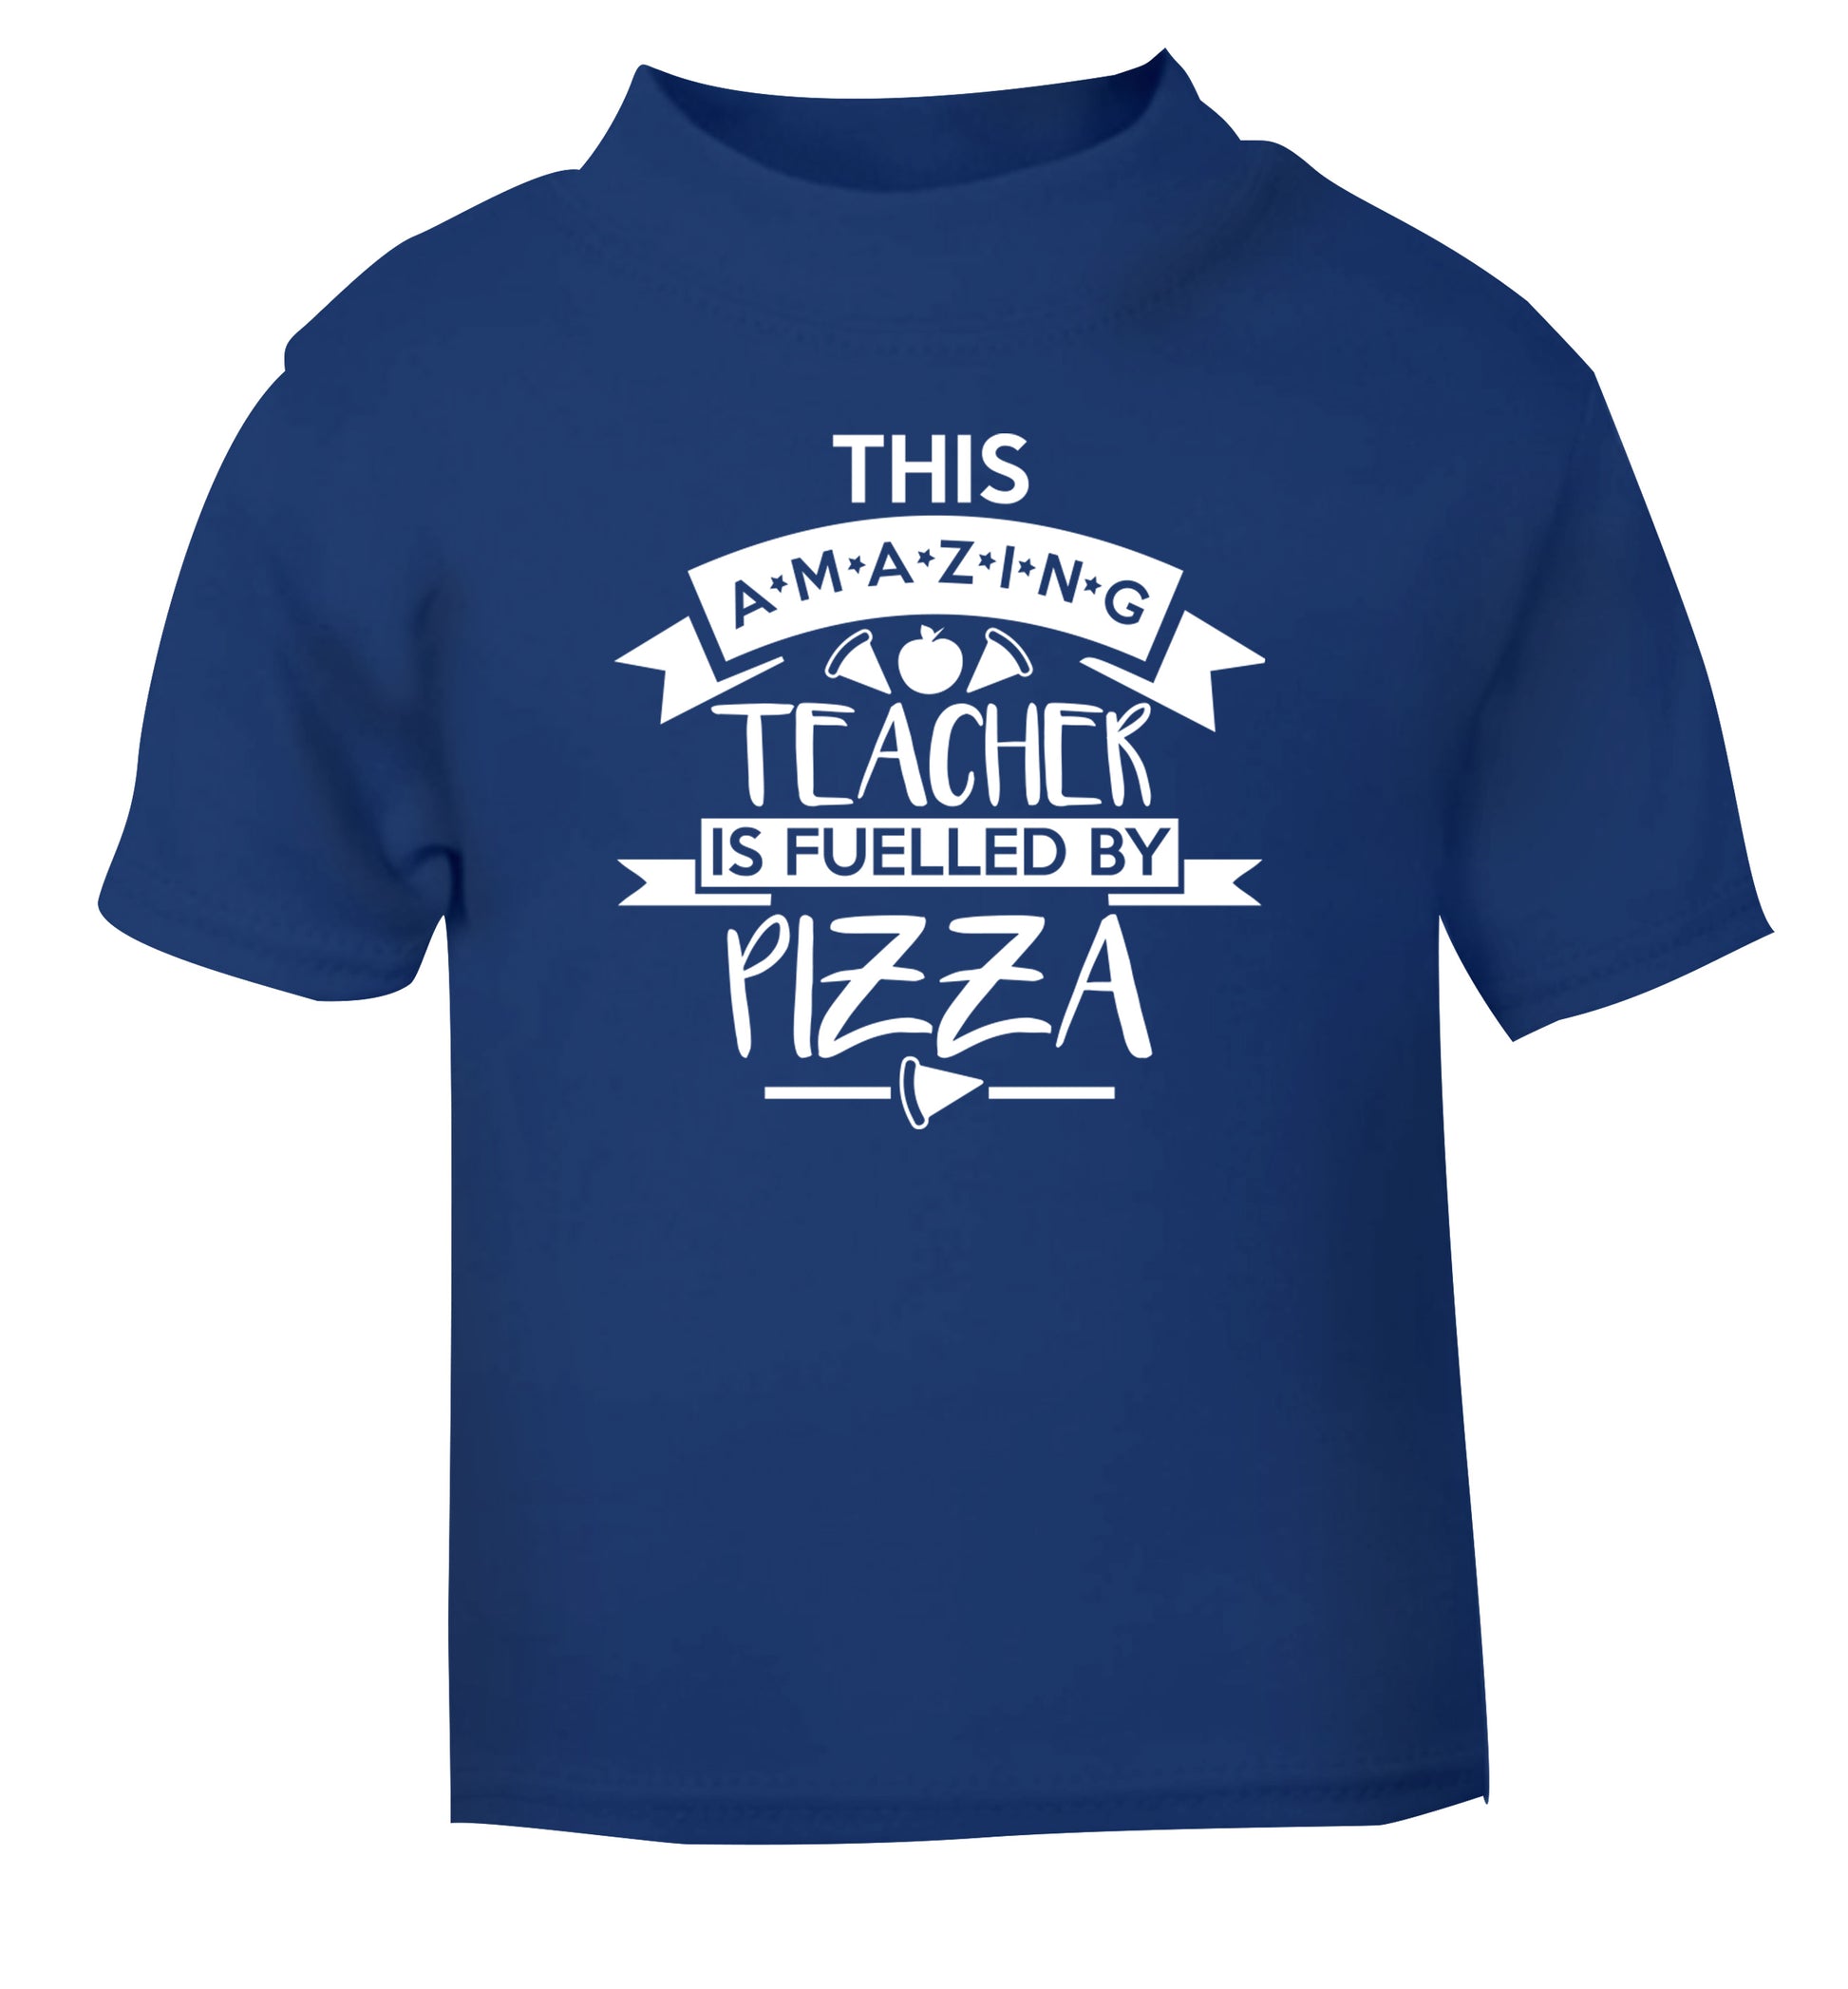 This amazing teacher is fuelled by pizza blue Baby Toddler Tshirt 2 Years